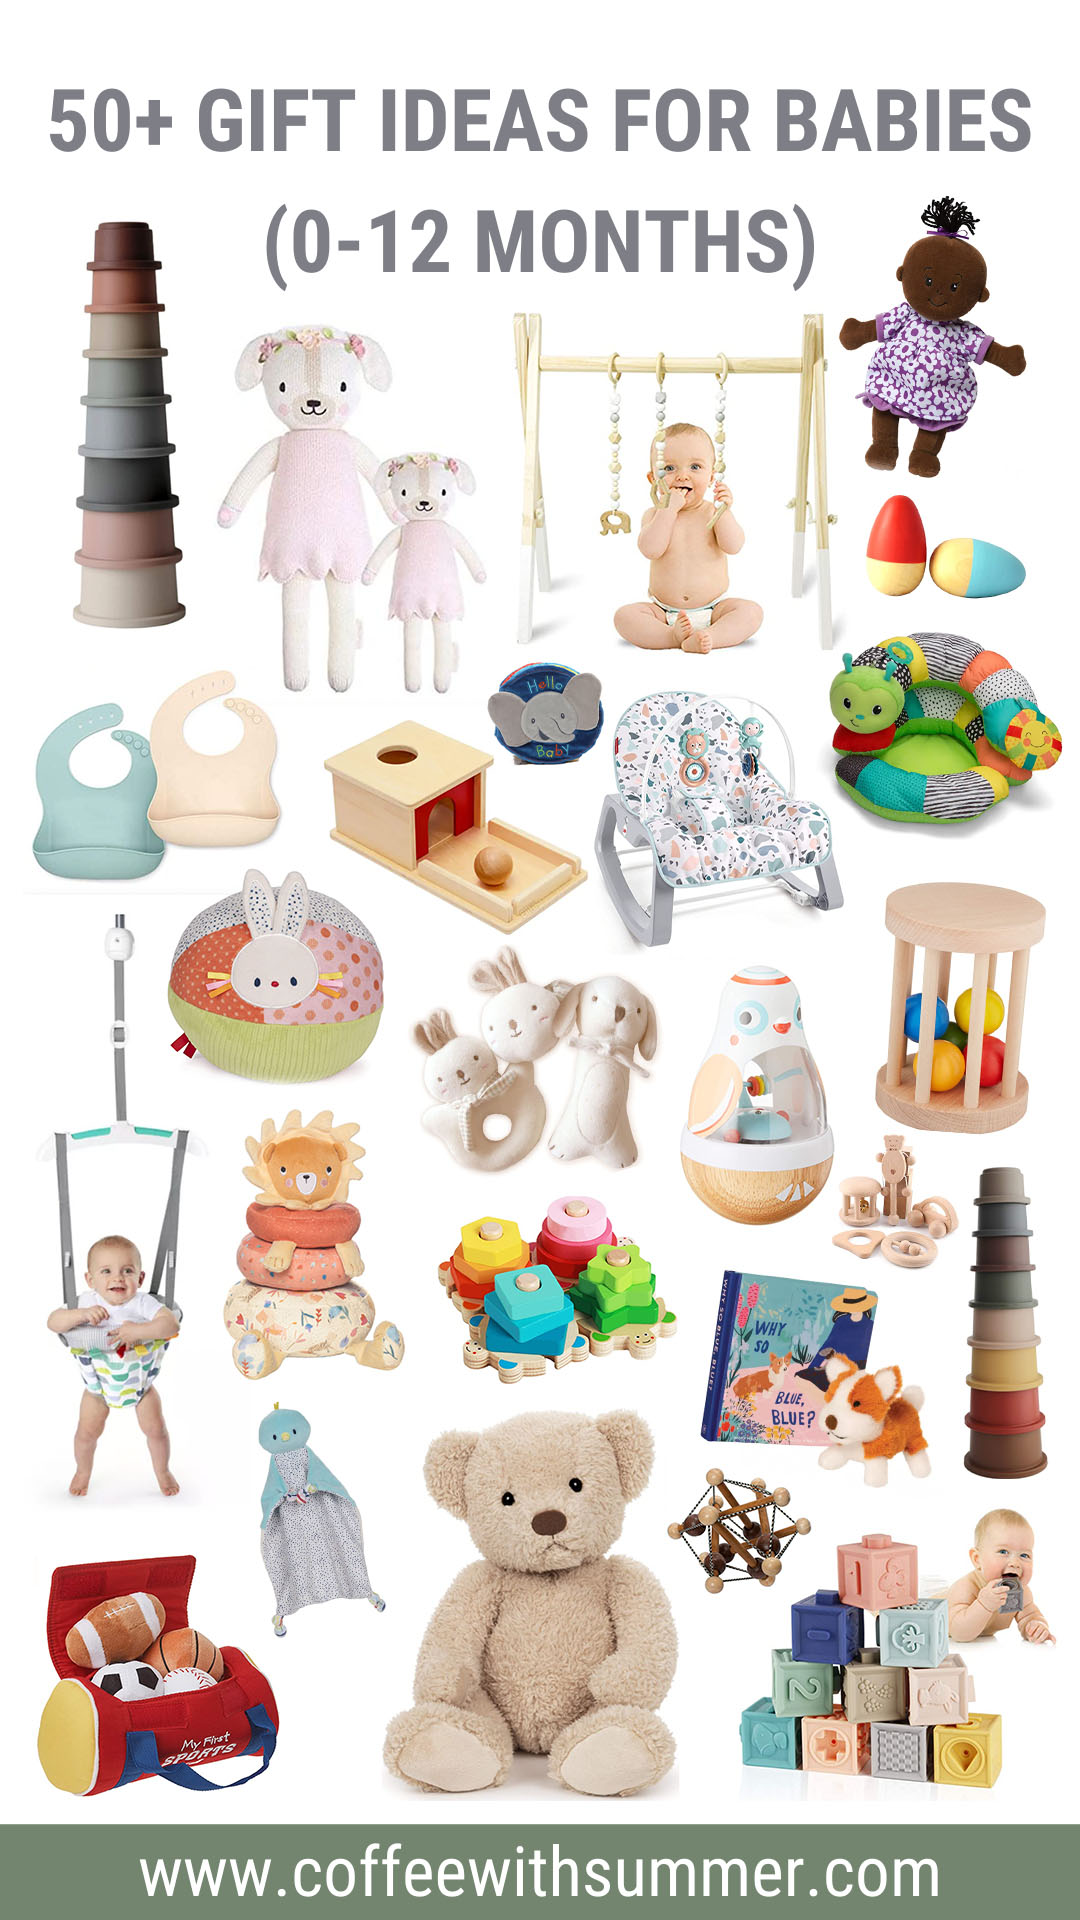 Gift Ideas For Babies 0-12 Months